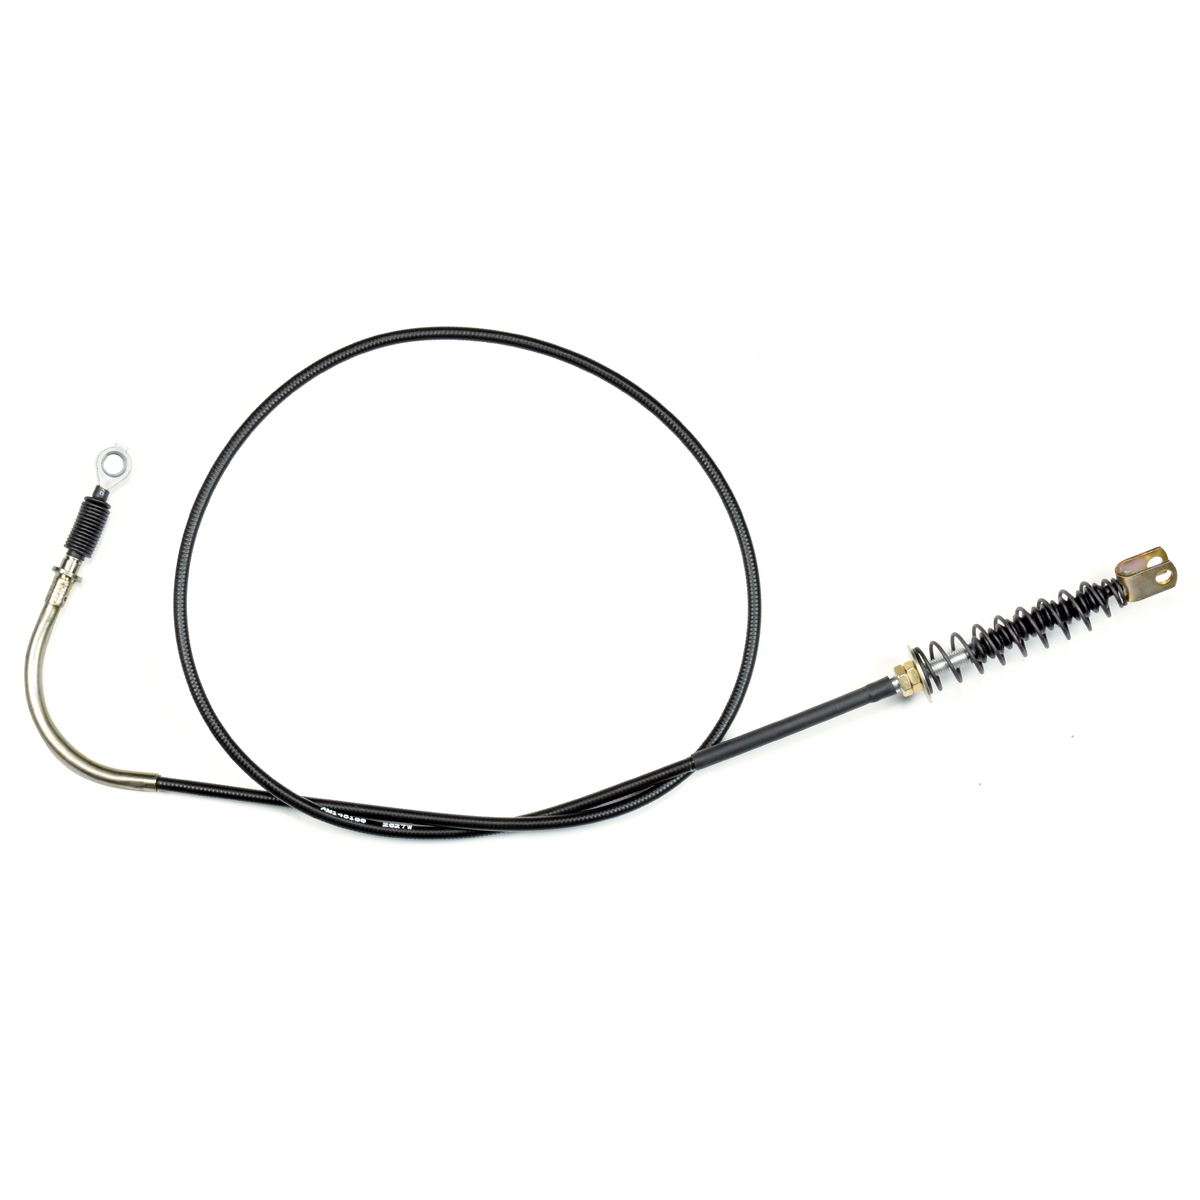 Park Brake Cable for RSX and XUV Gators